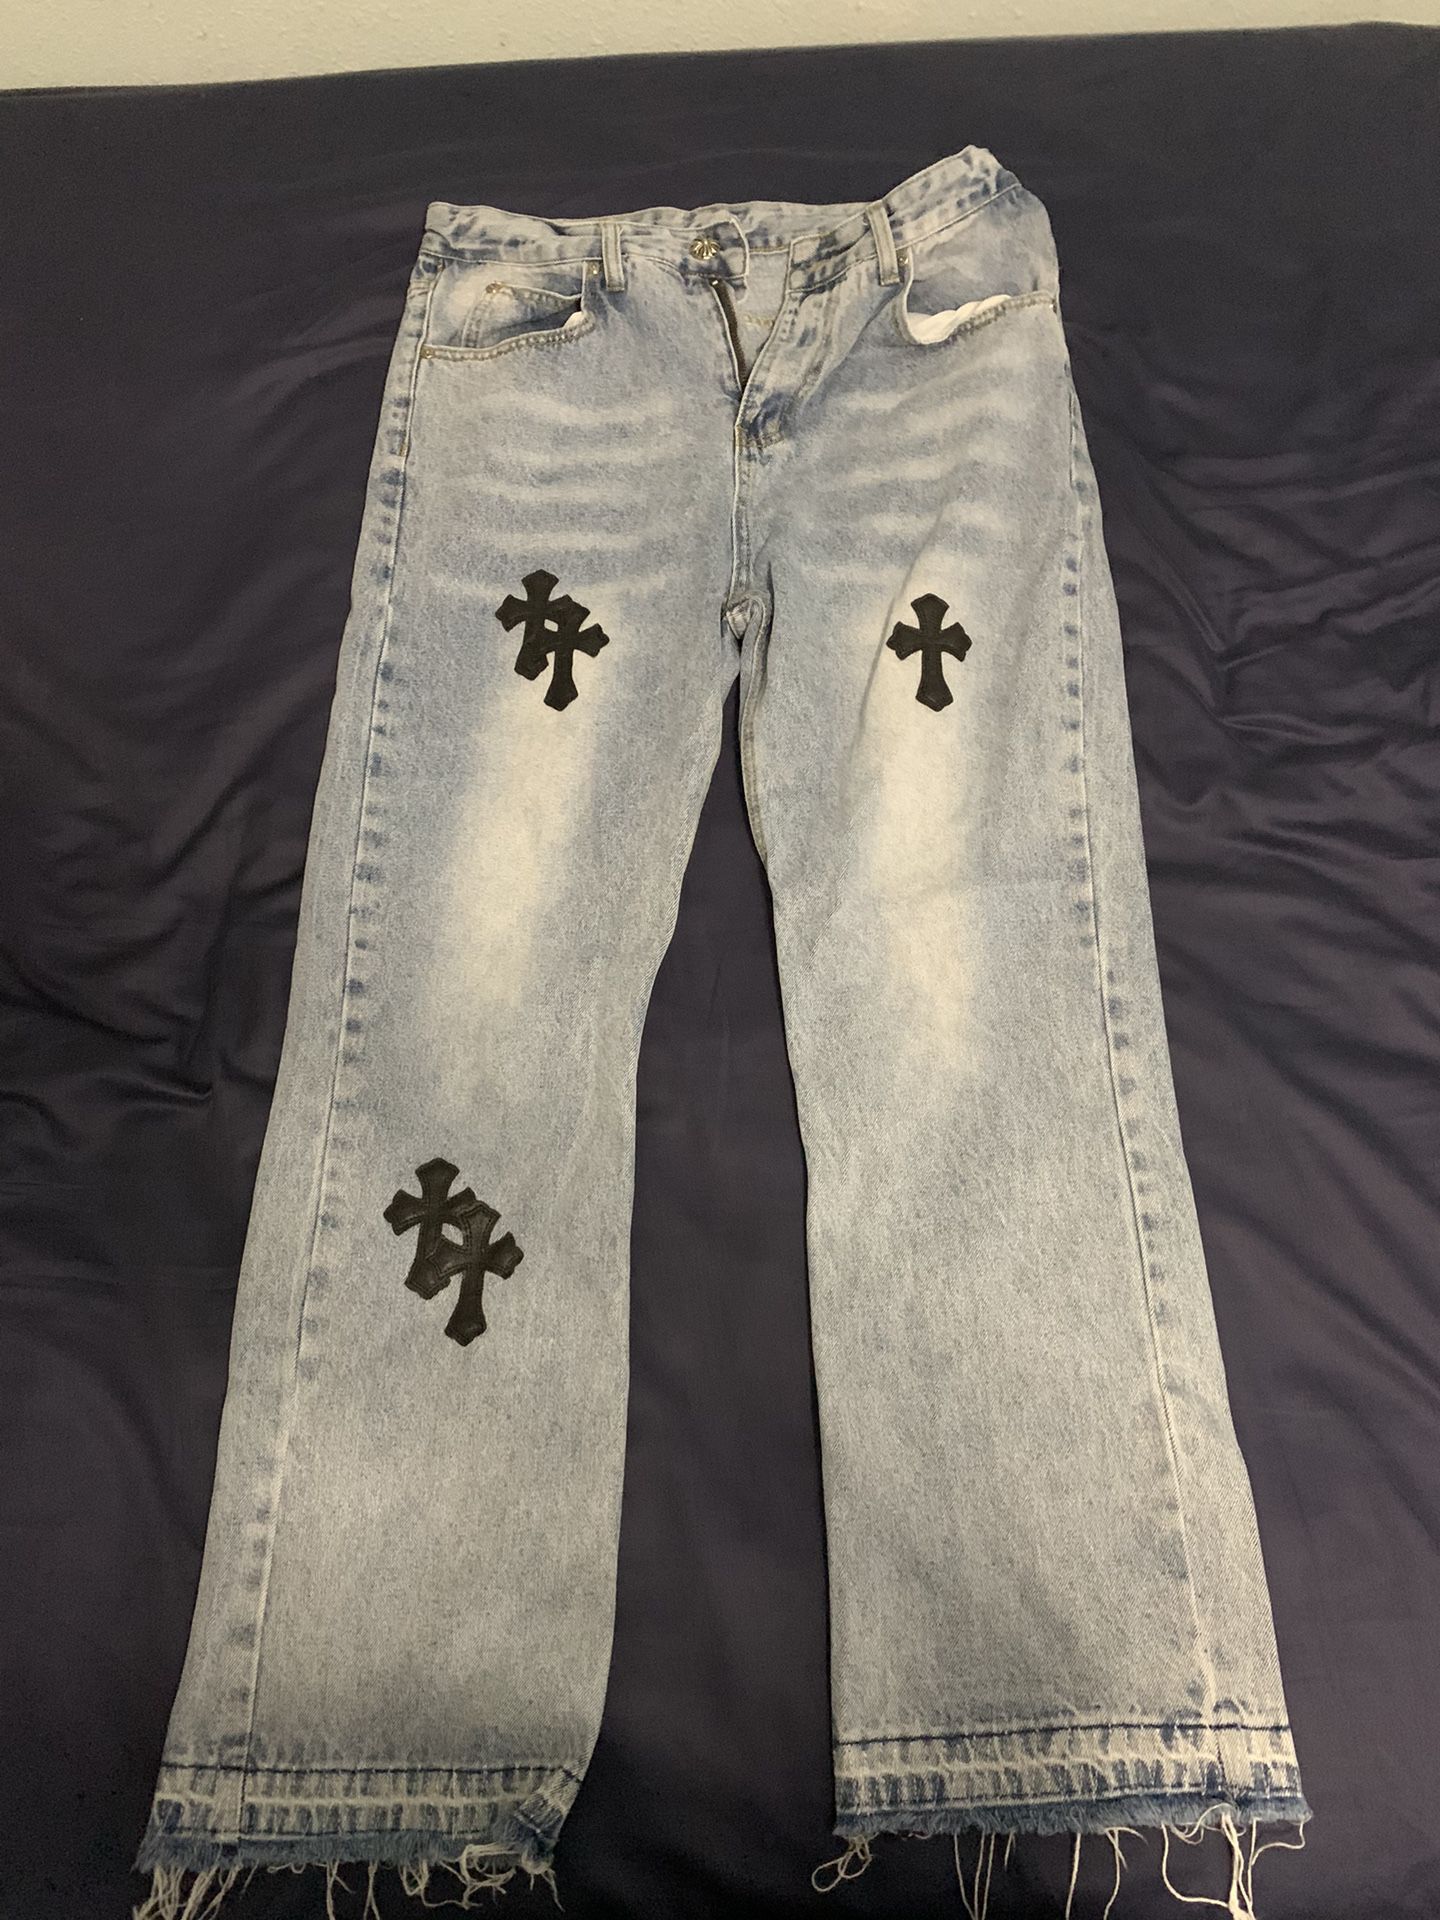 Chrome Hearts Jeans  official Chrome Hearts Clothing